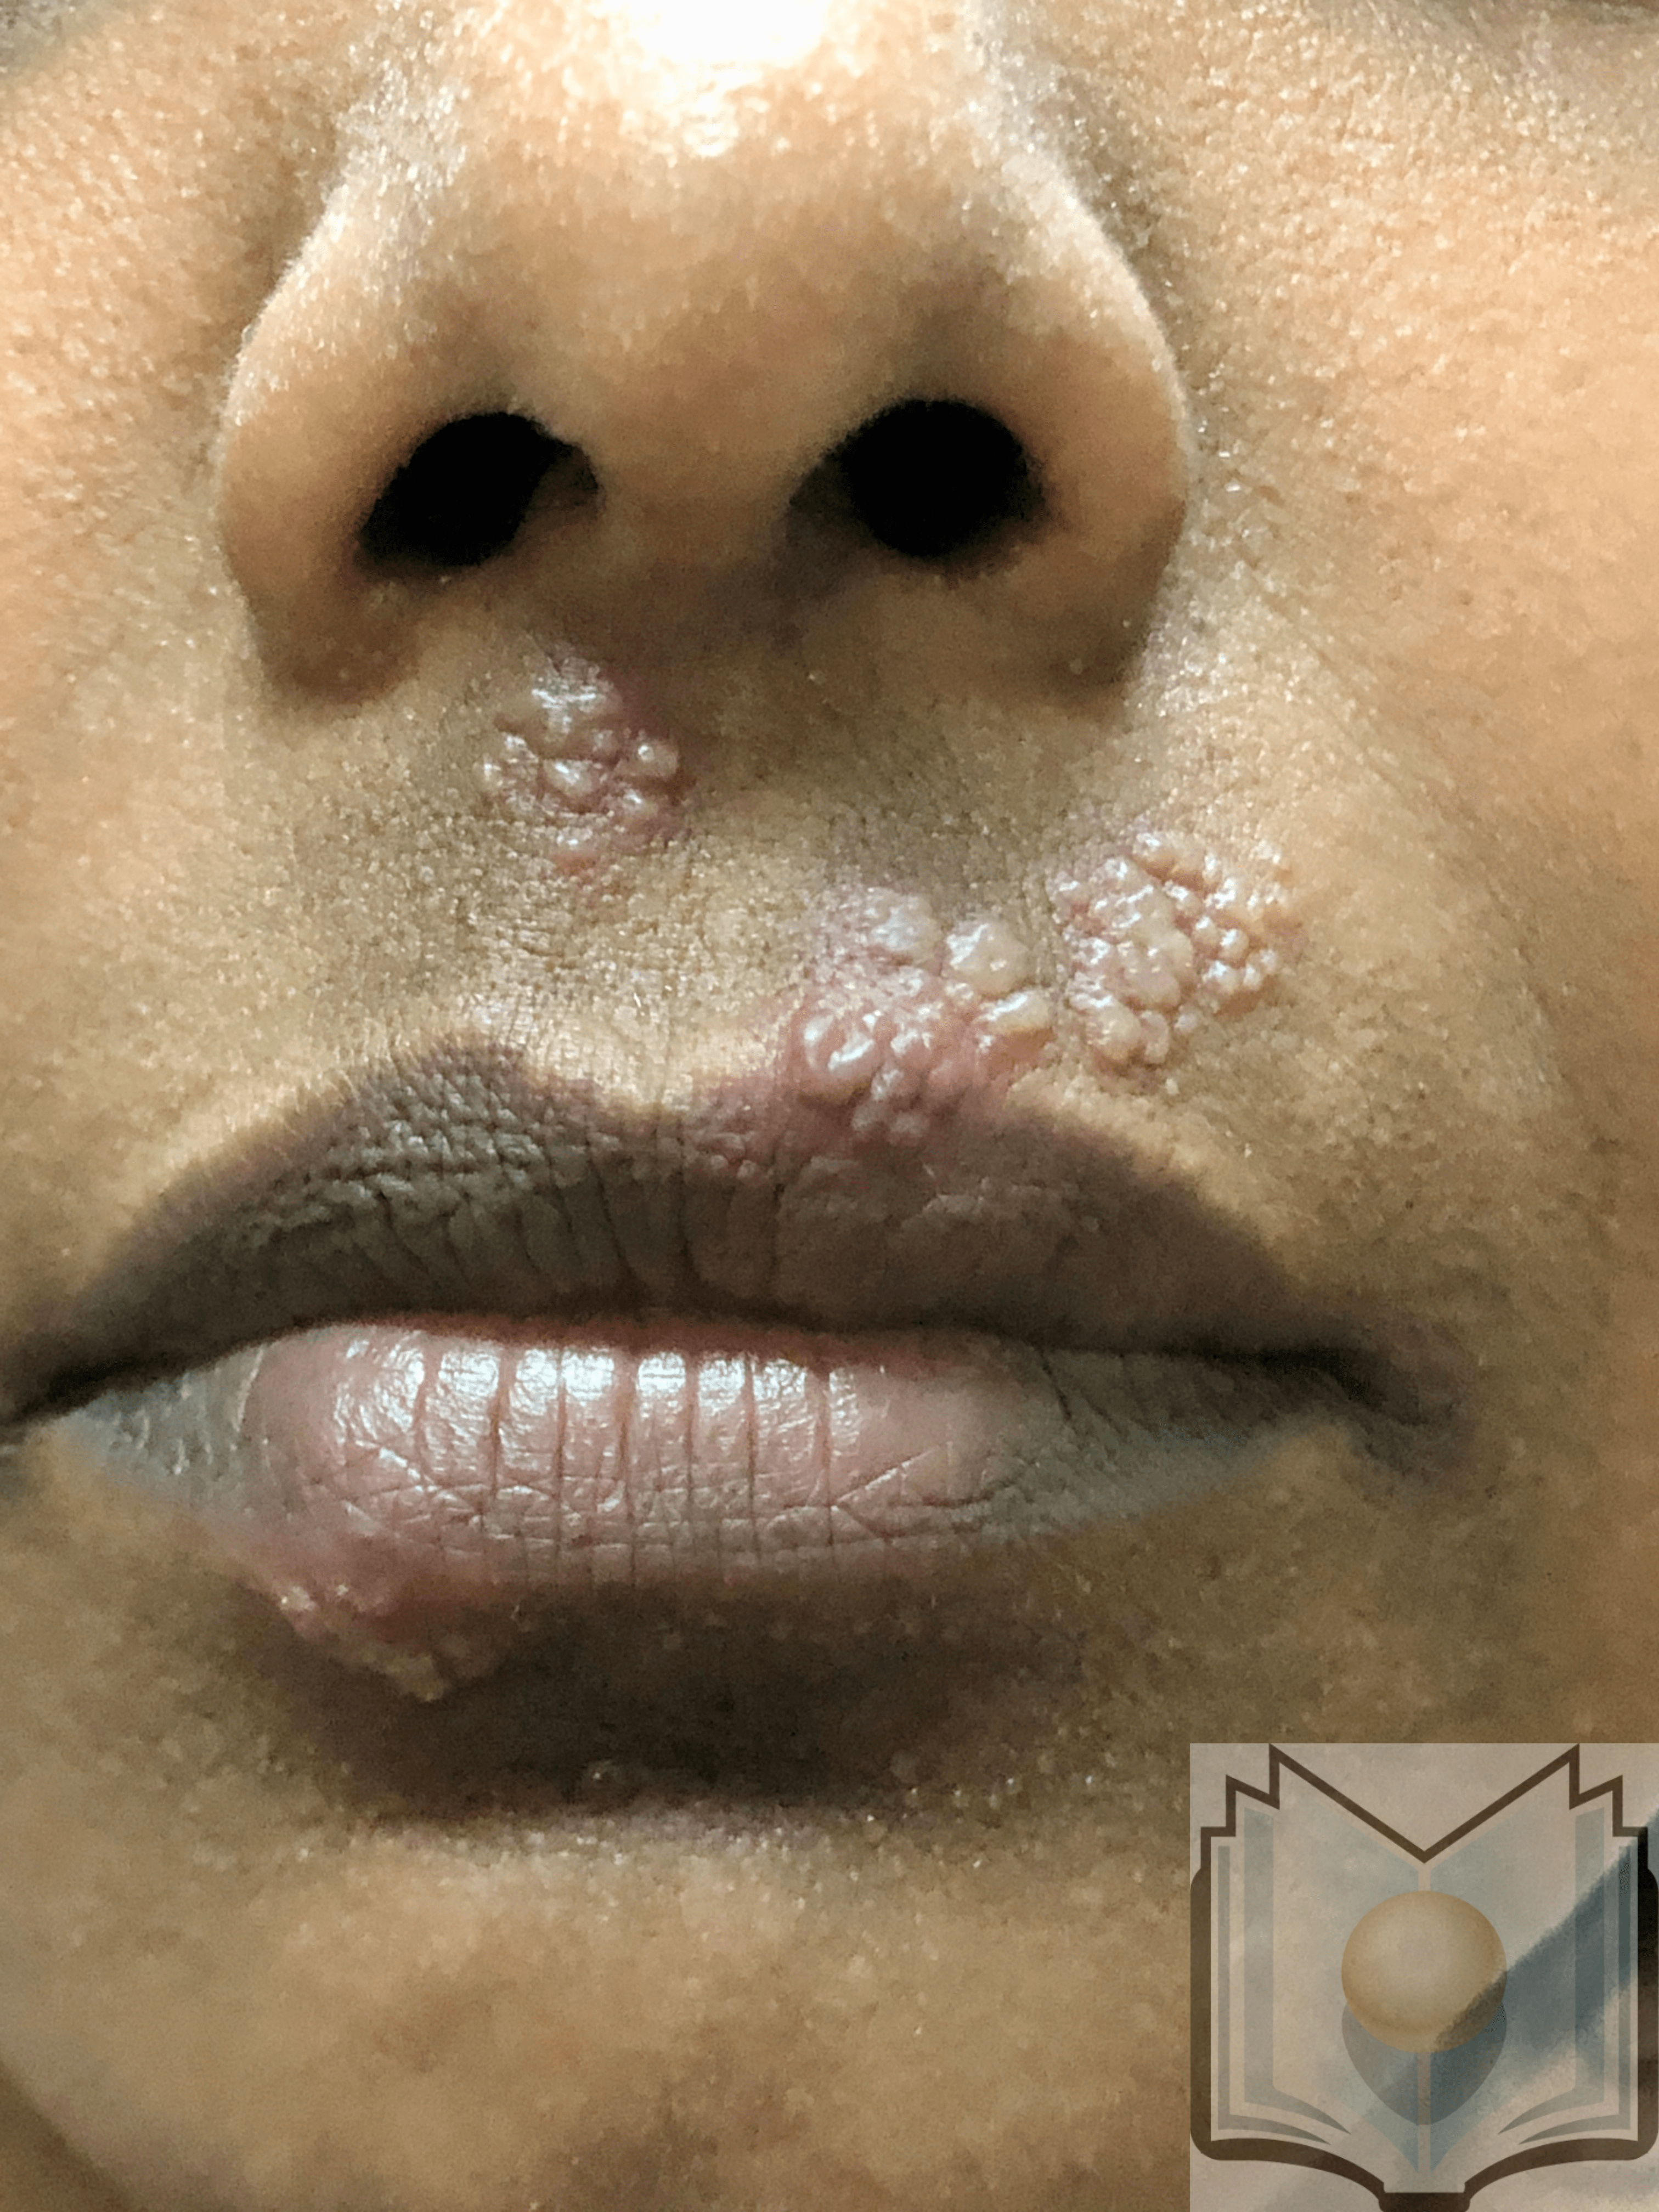 Herpes Simplex mouth